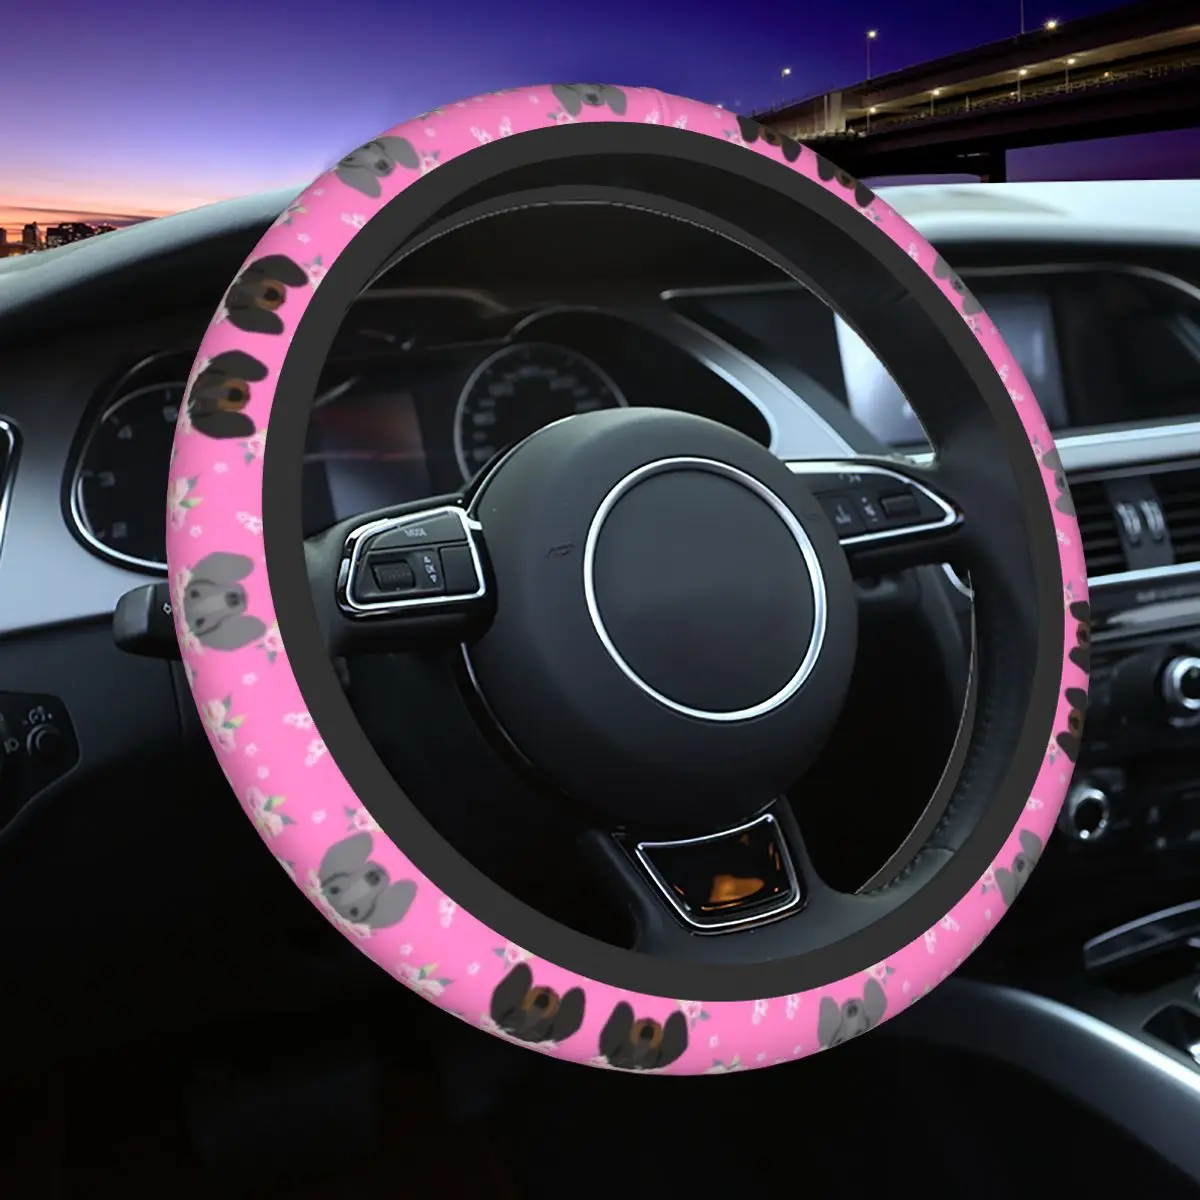 

Puppy Dachshund Sausage Florals Auto Car Steering Wheel Cover Pet Anti Slip Universal Steering Wheel Protector Fit for Sedan